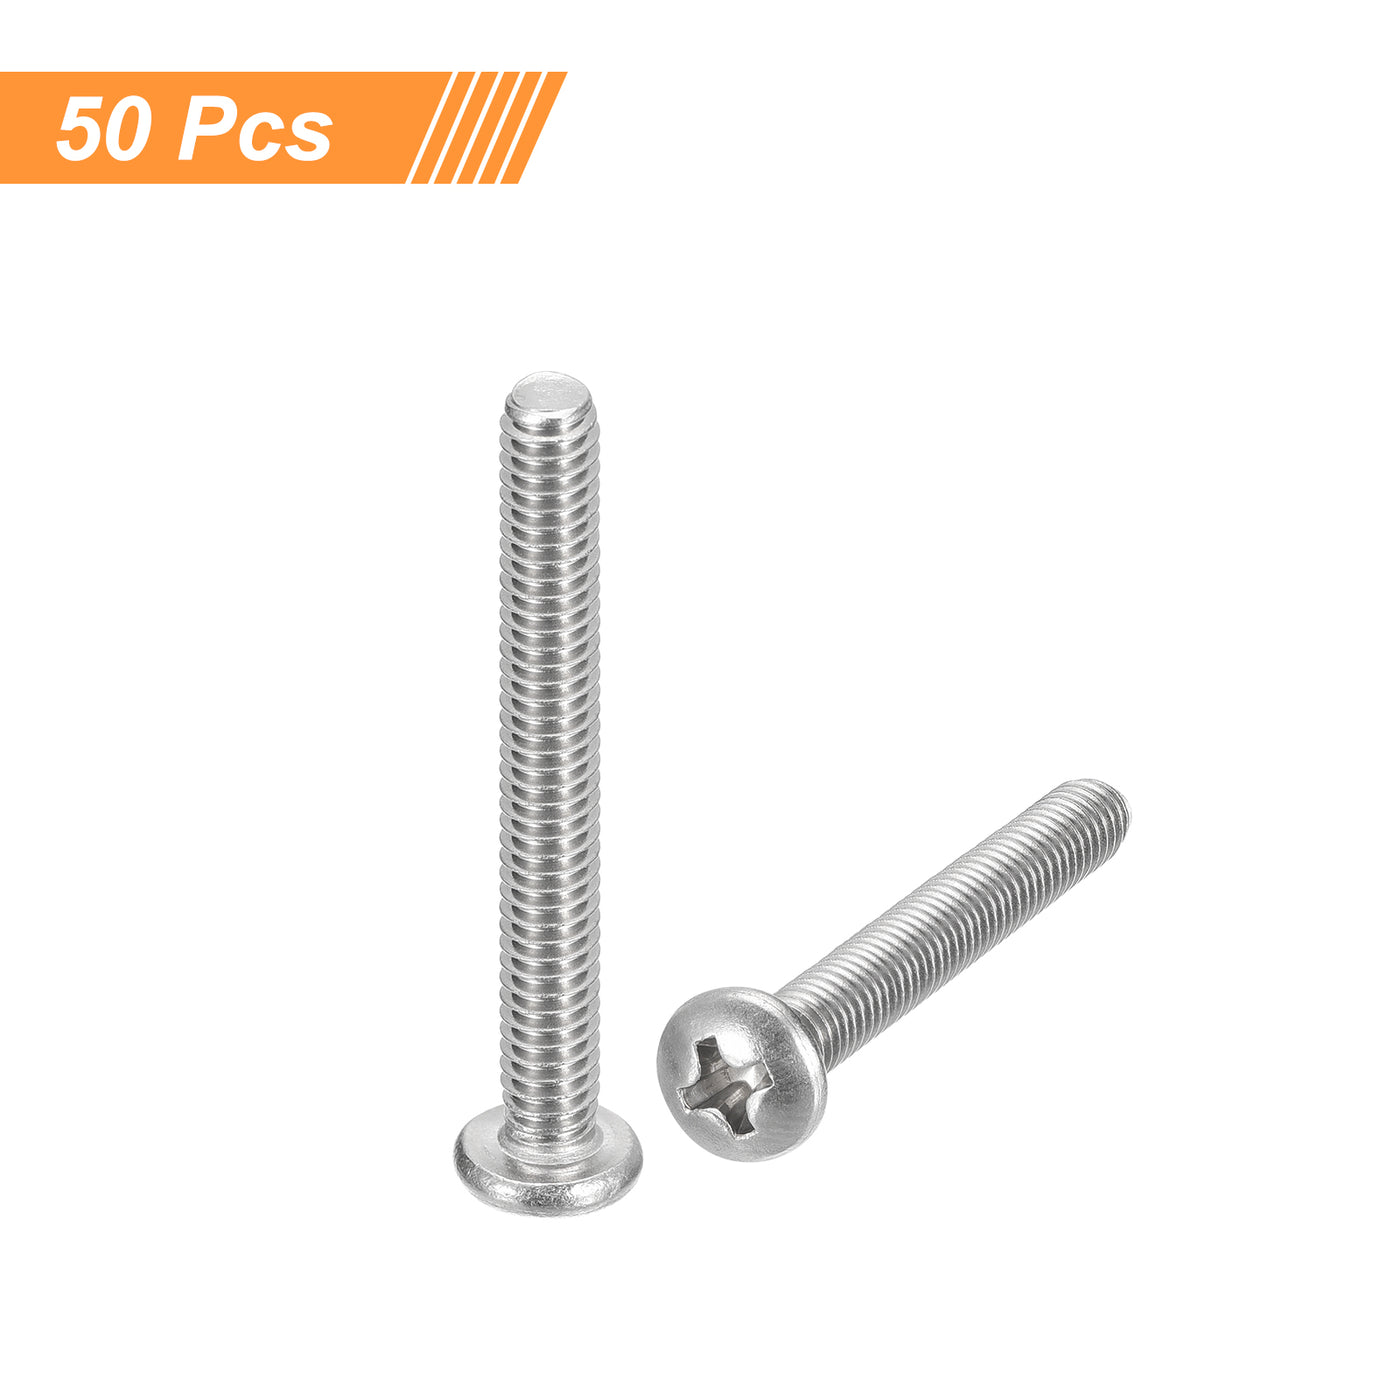 uxcell Uxcell #8-32x1-3/8" Pan Head Machine Screws, Stainless Steel 18-8 Screw, Pack of 50